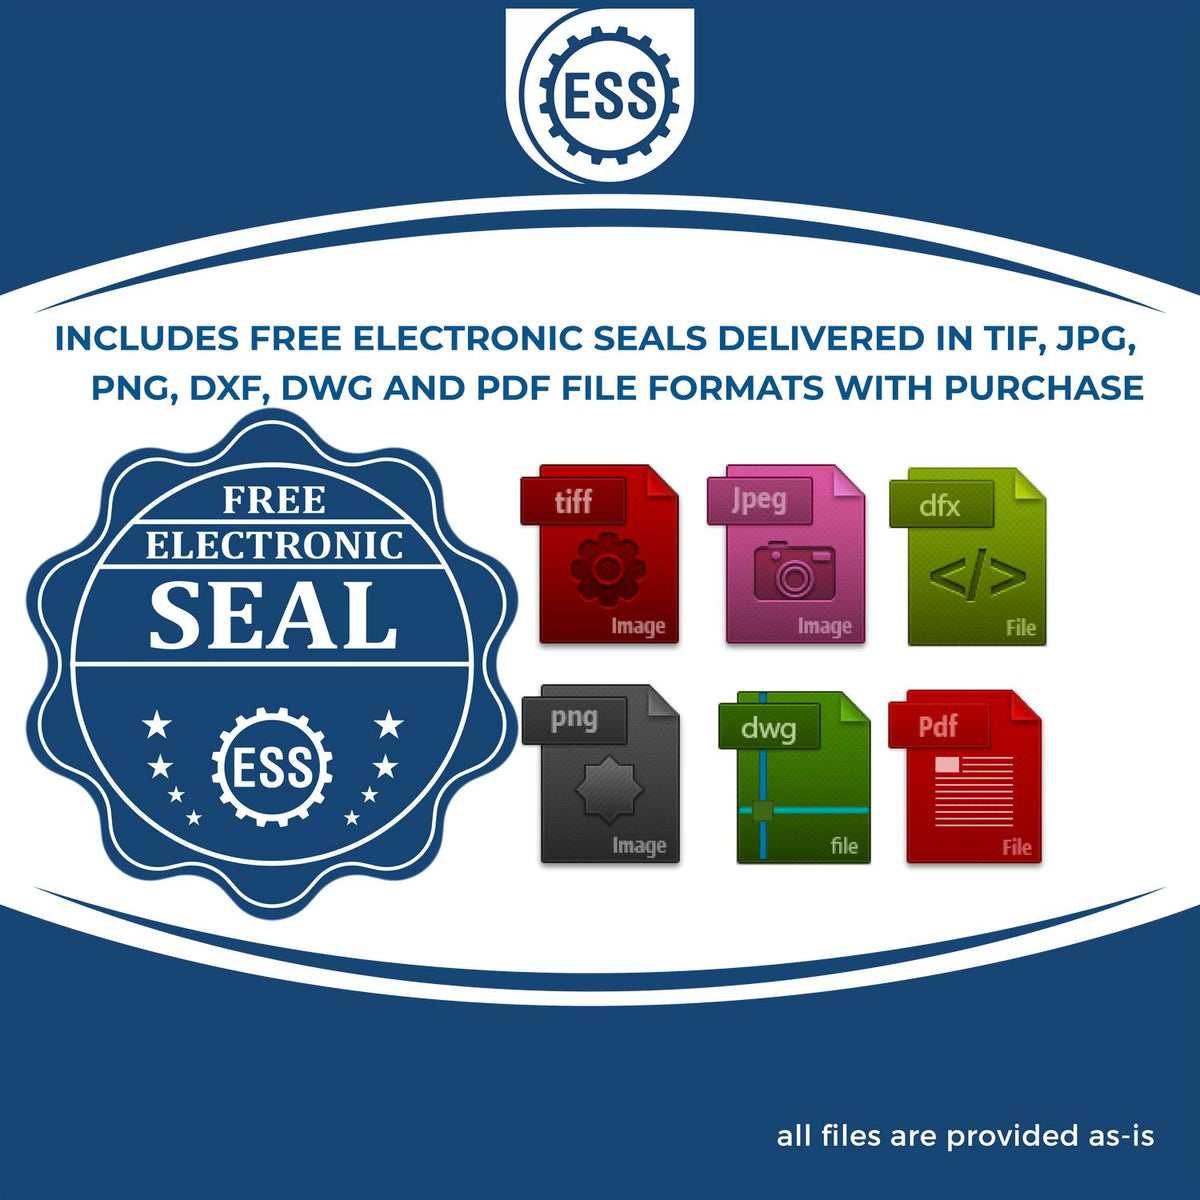 An infographic for the free electronic seal for the Handheld Missouri Professional Geologist Embosser illustrating the different file type icons such as DXF, DWG, TIF, JPG and PNG.